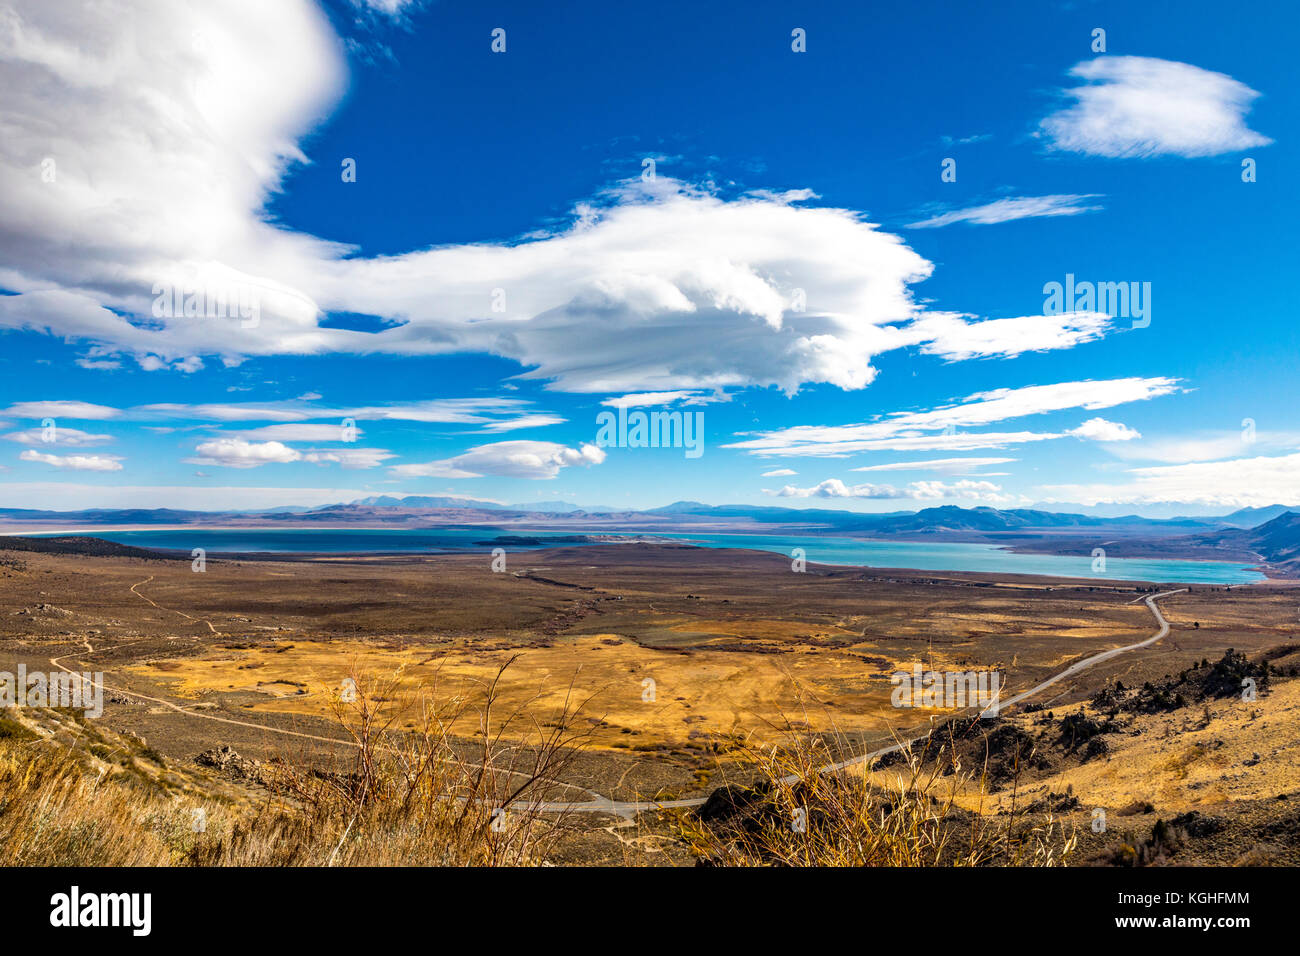 from-mono-lake-vista-point-along-california-highway-395-in-the-eastern-KGHFMM.jpg